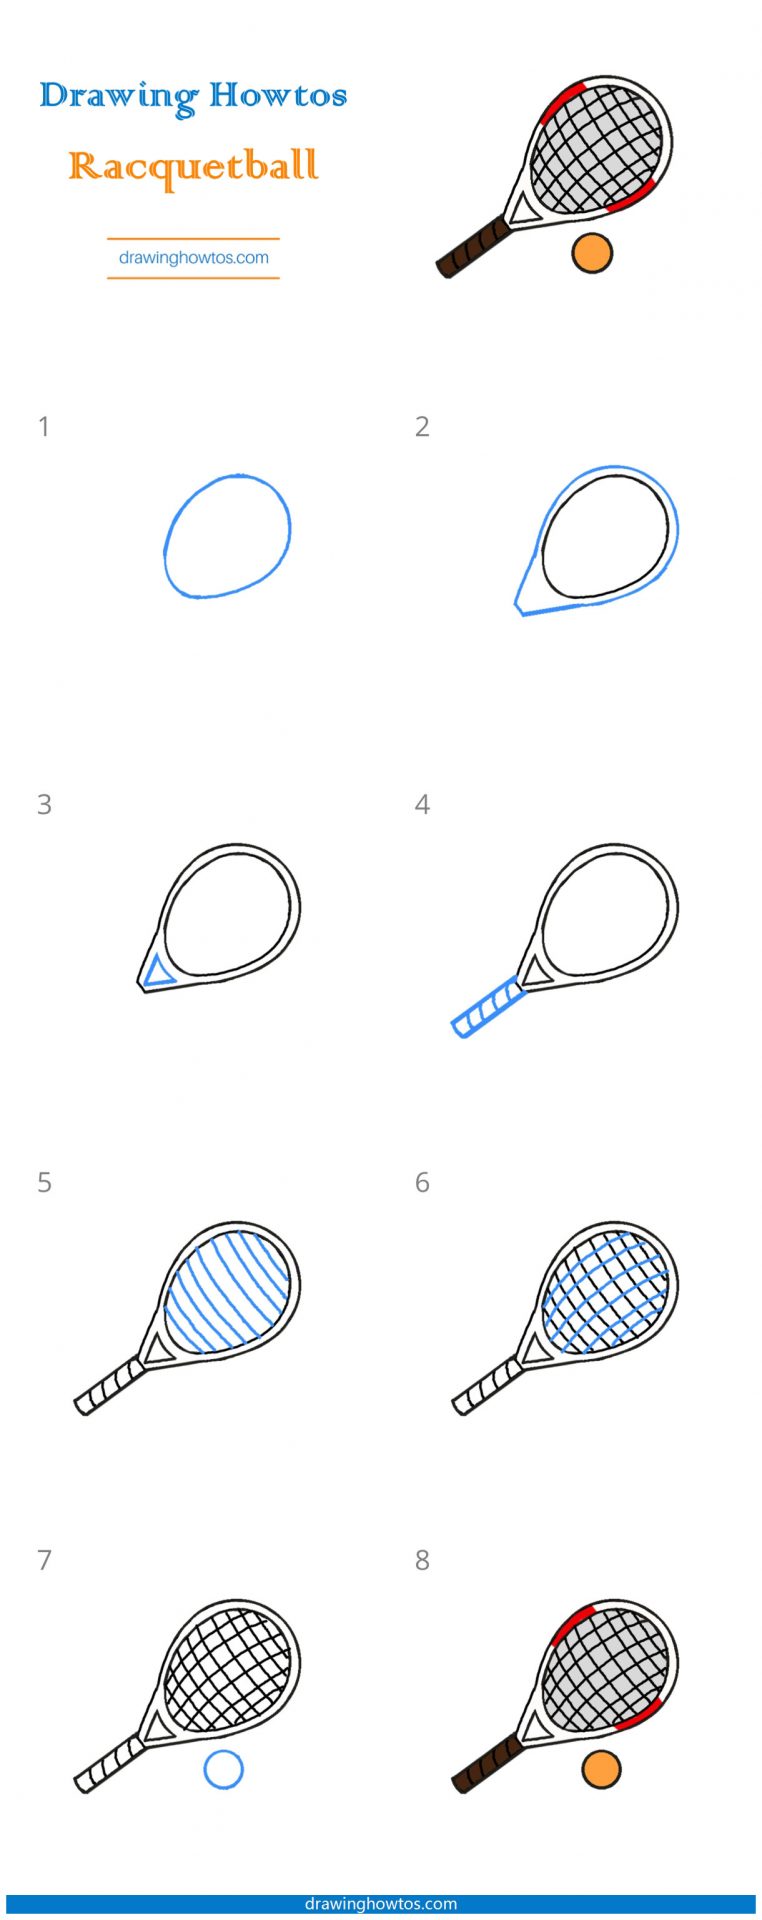 How to Draw a Racquetball Racket Step by Step